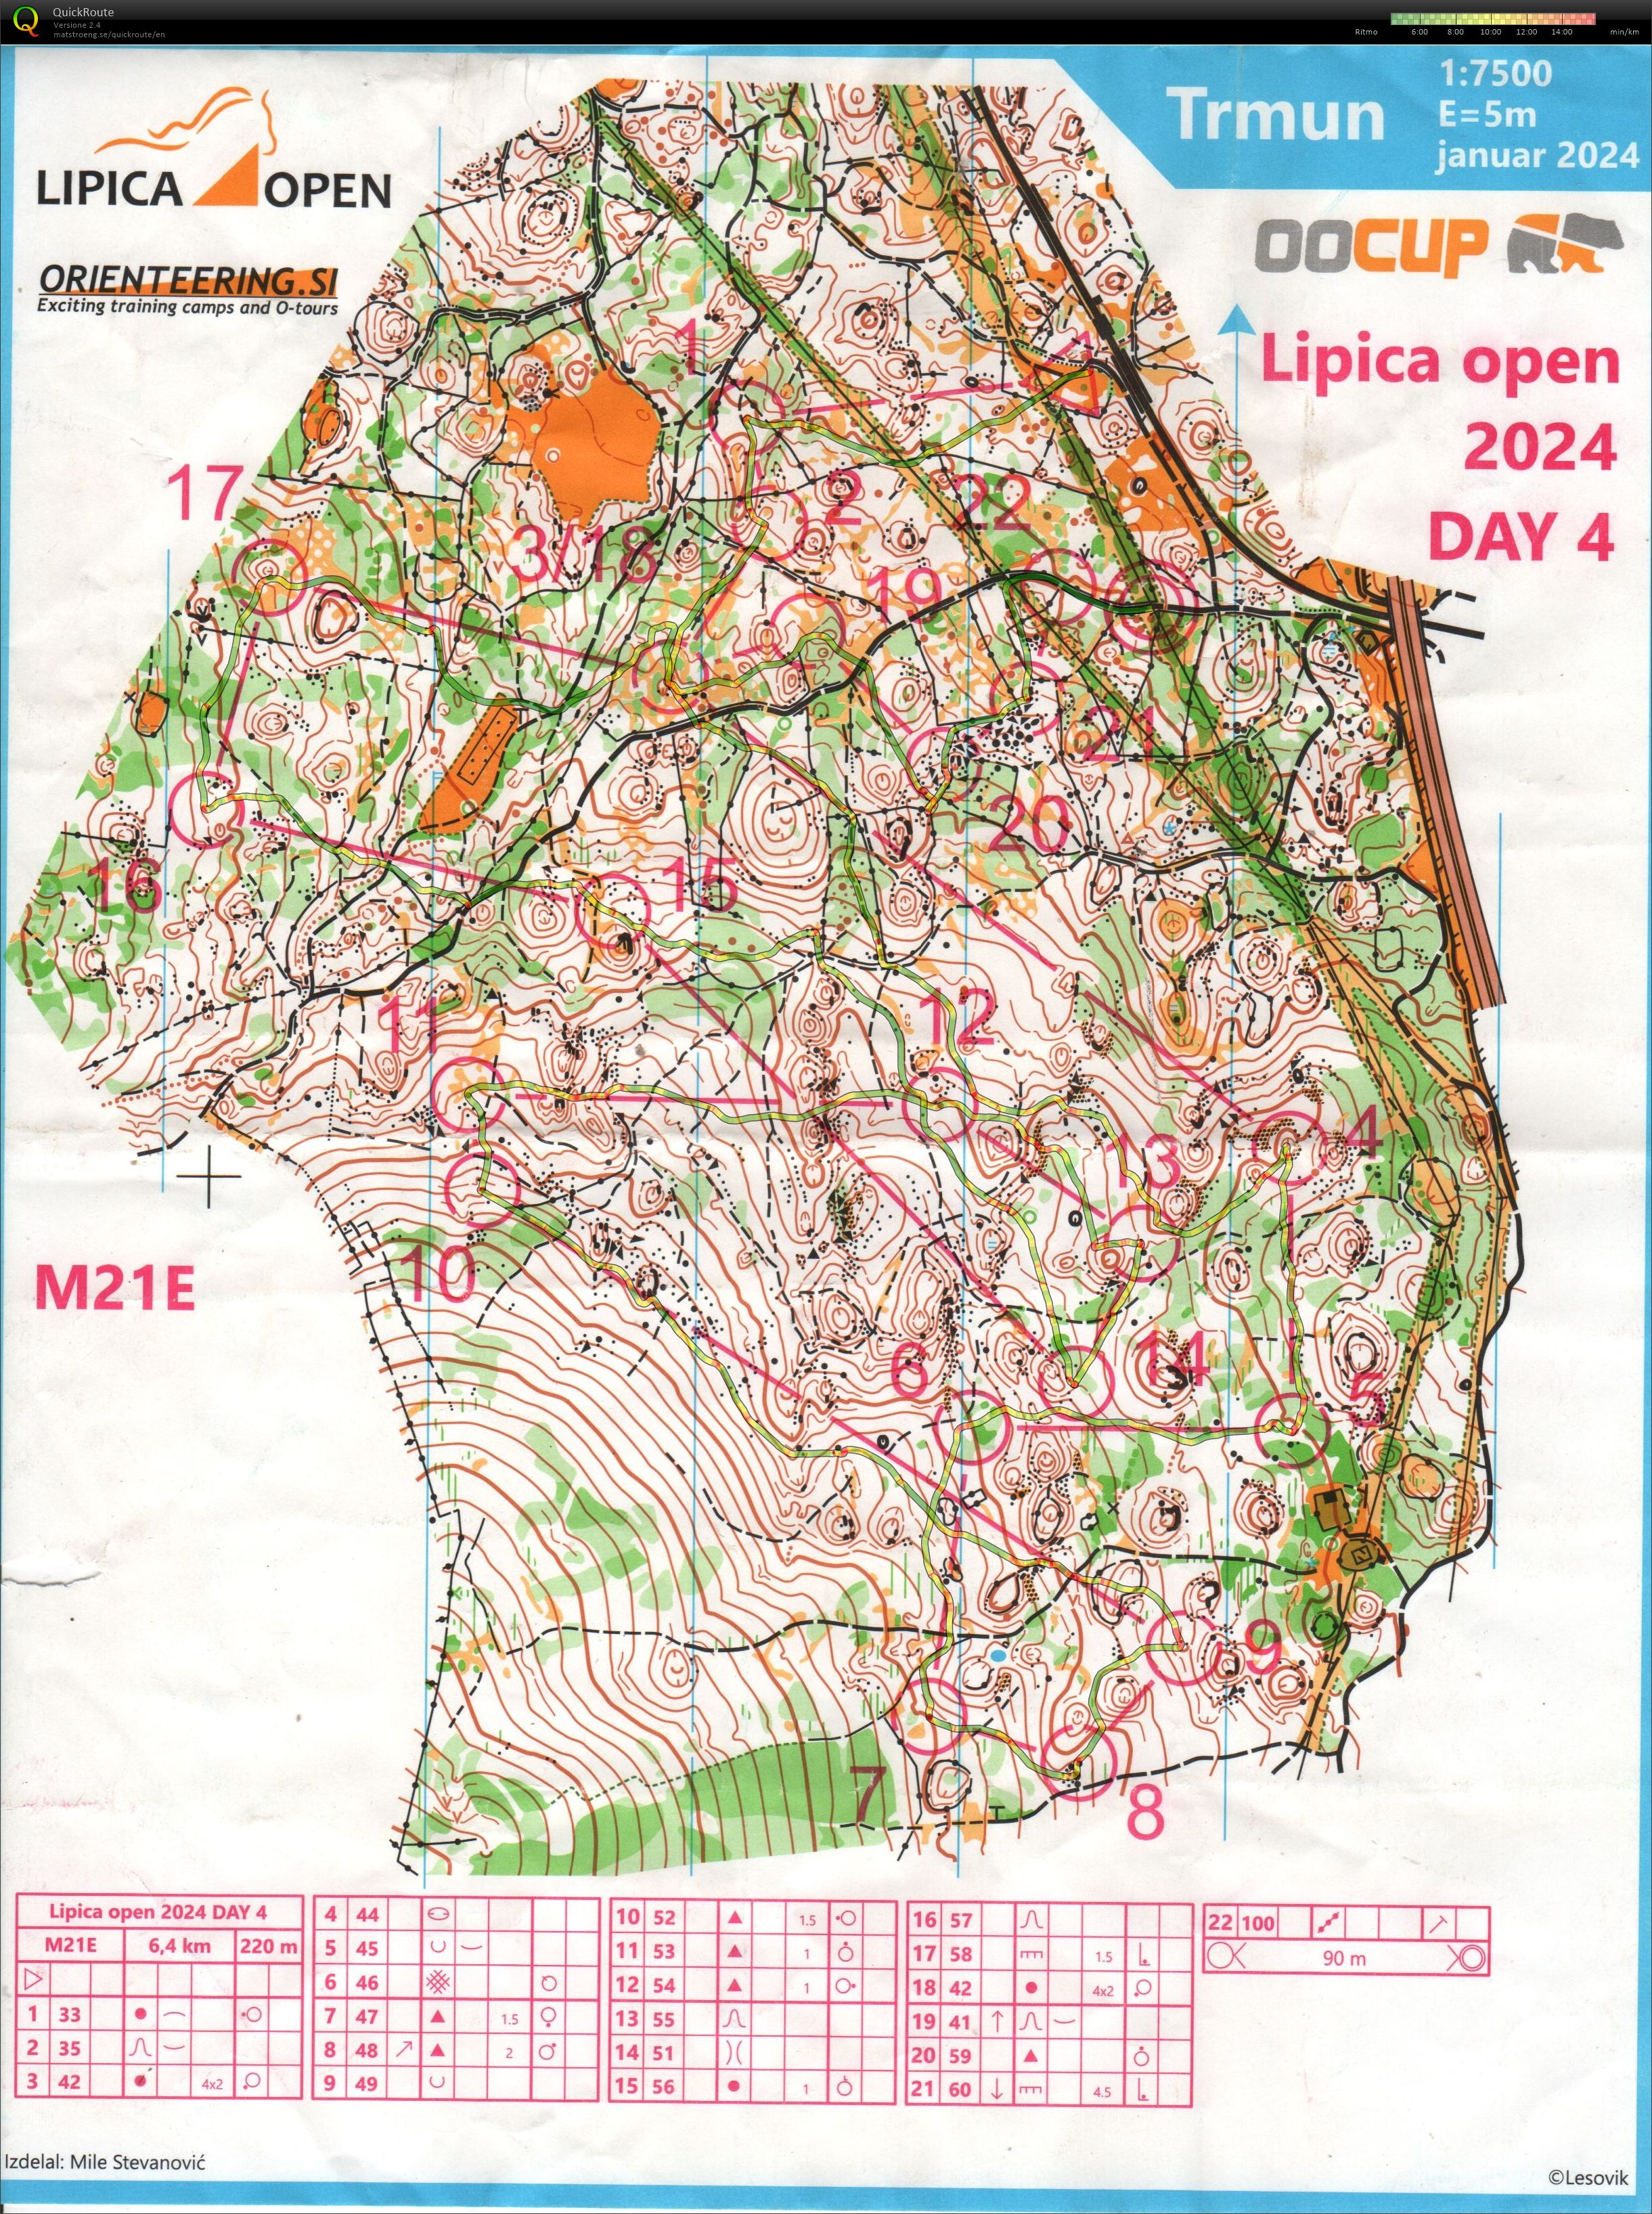 Lipica Open 2024 - day 4 (12-03-2024)